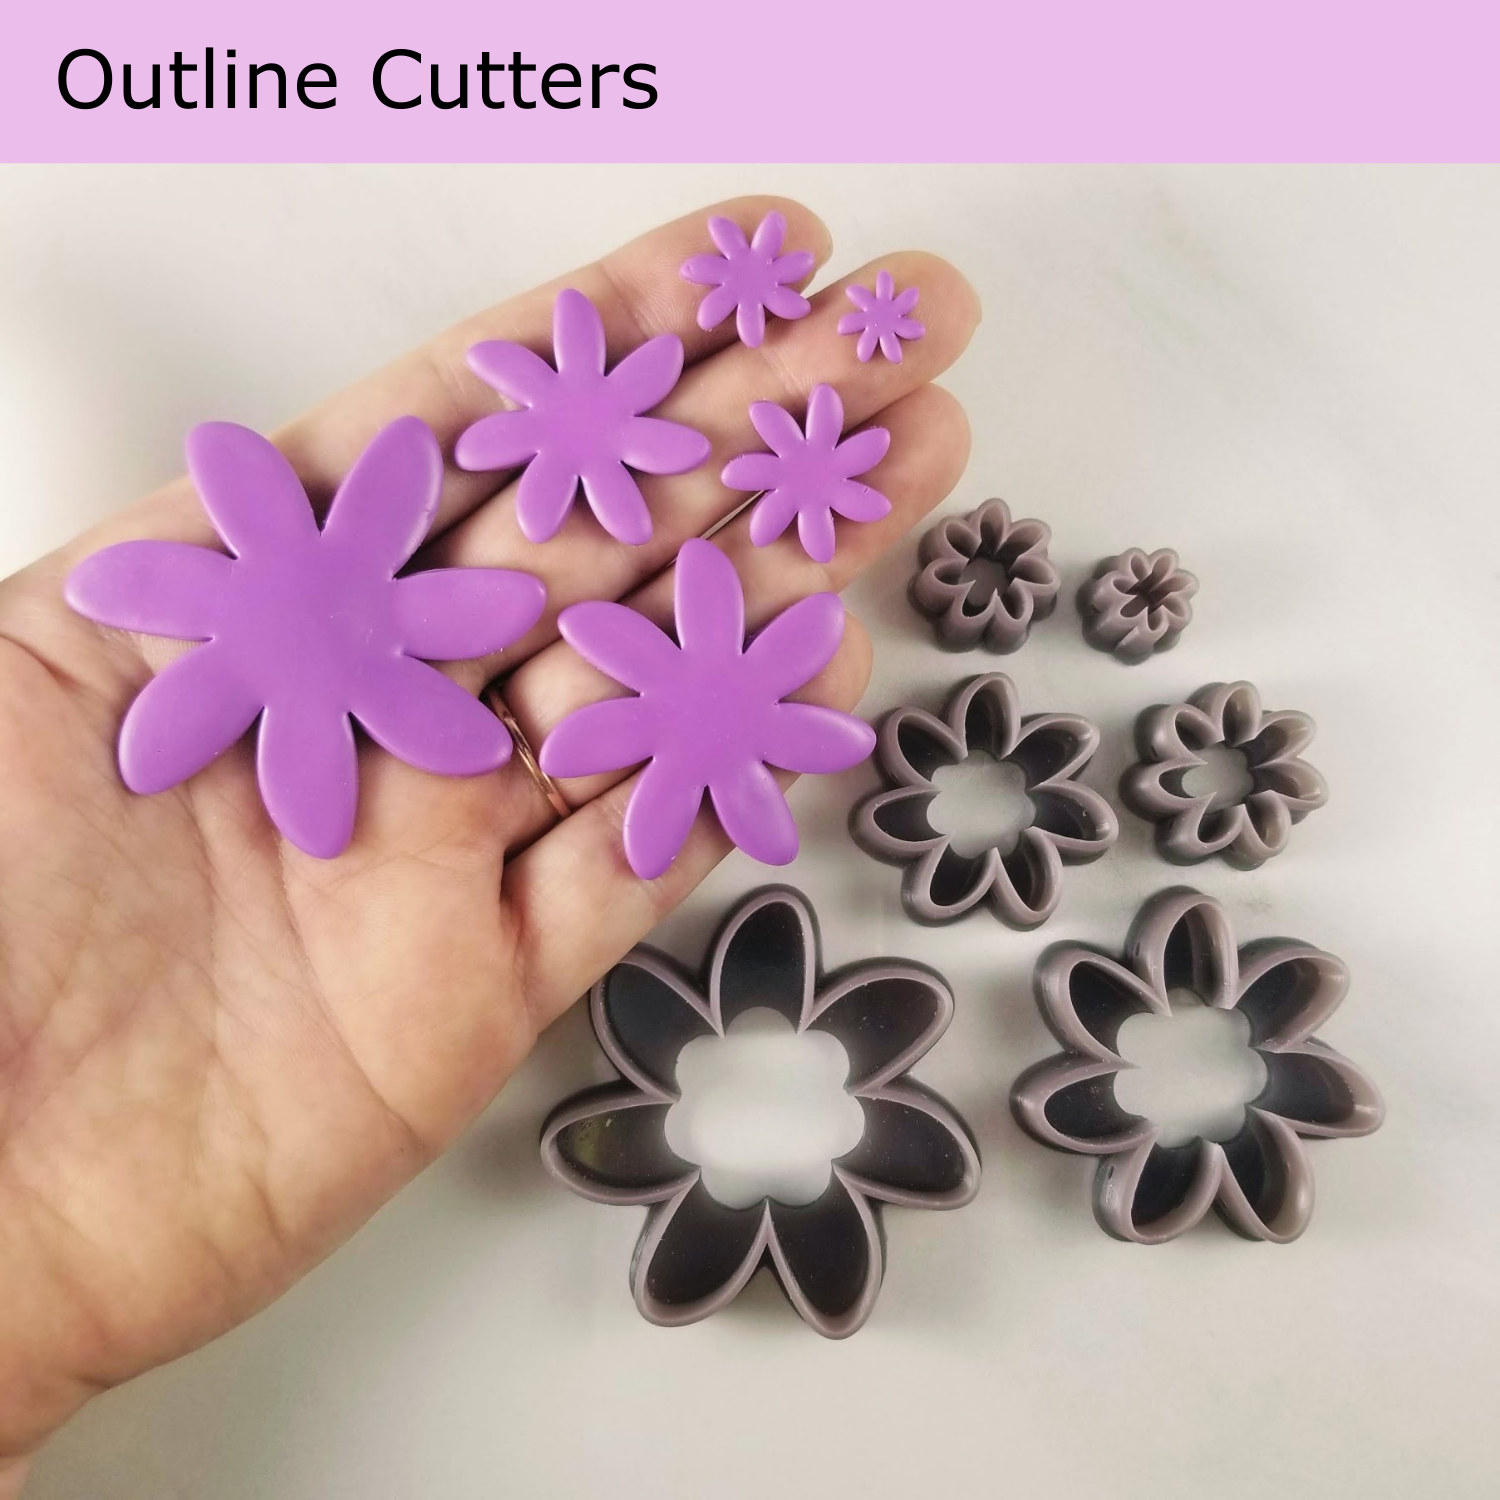 Tiare flower outline polymer clay cutter sample finish product details